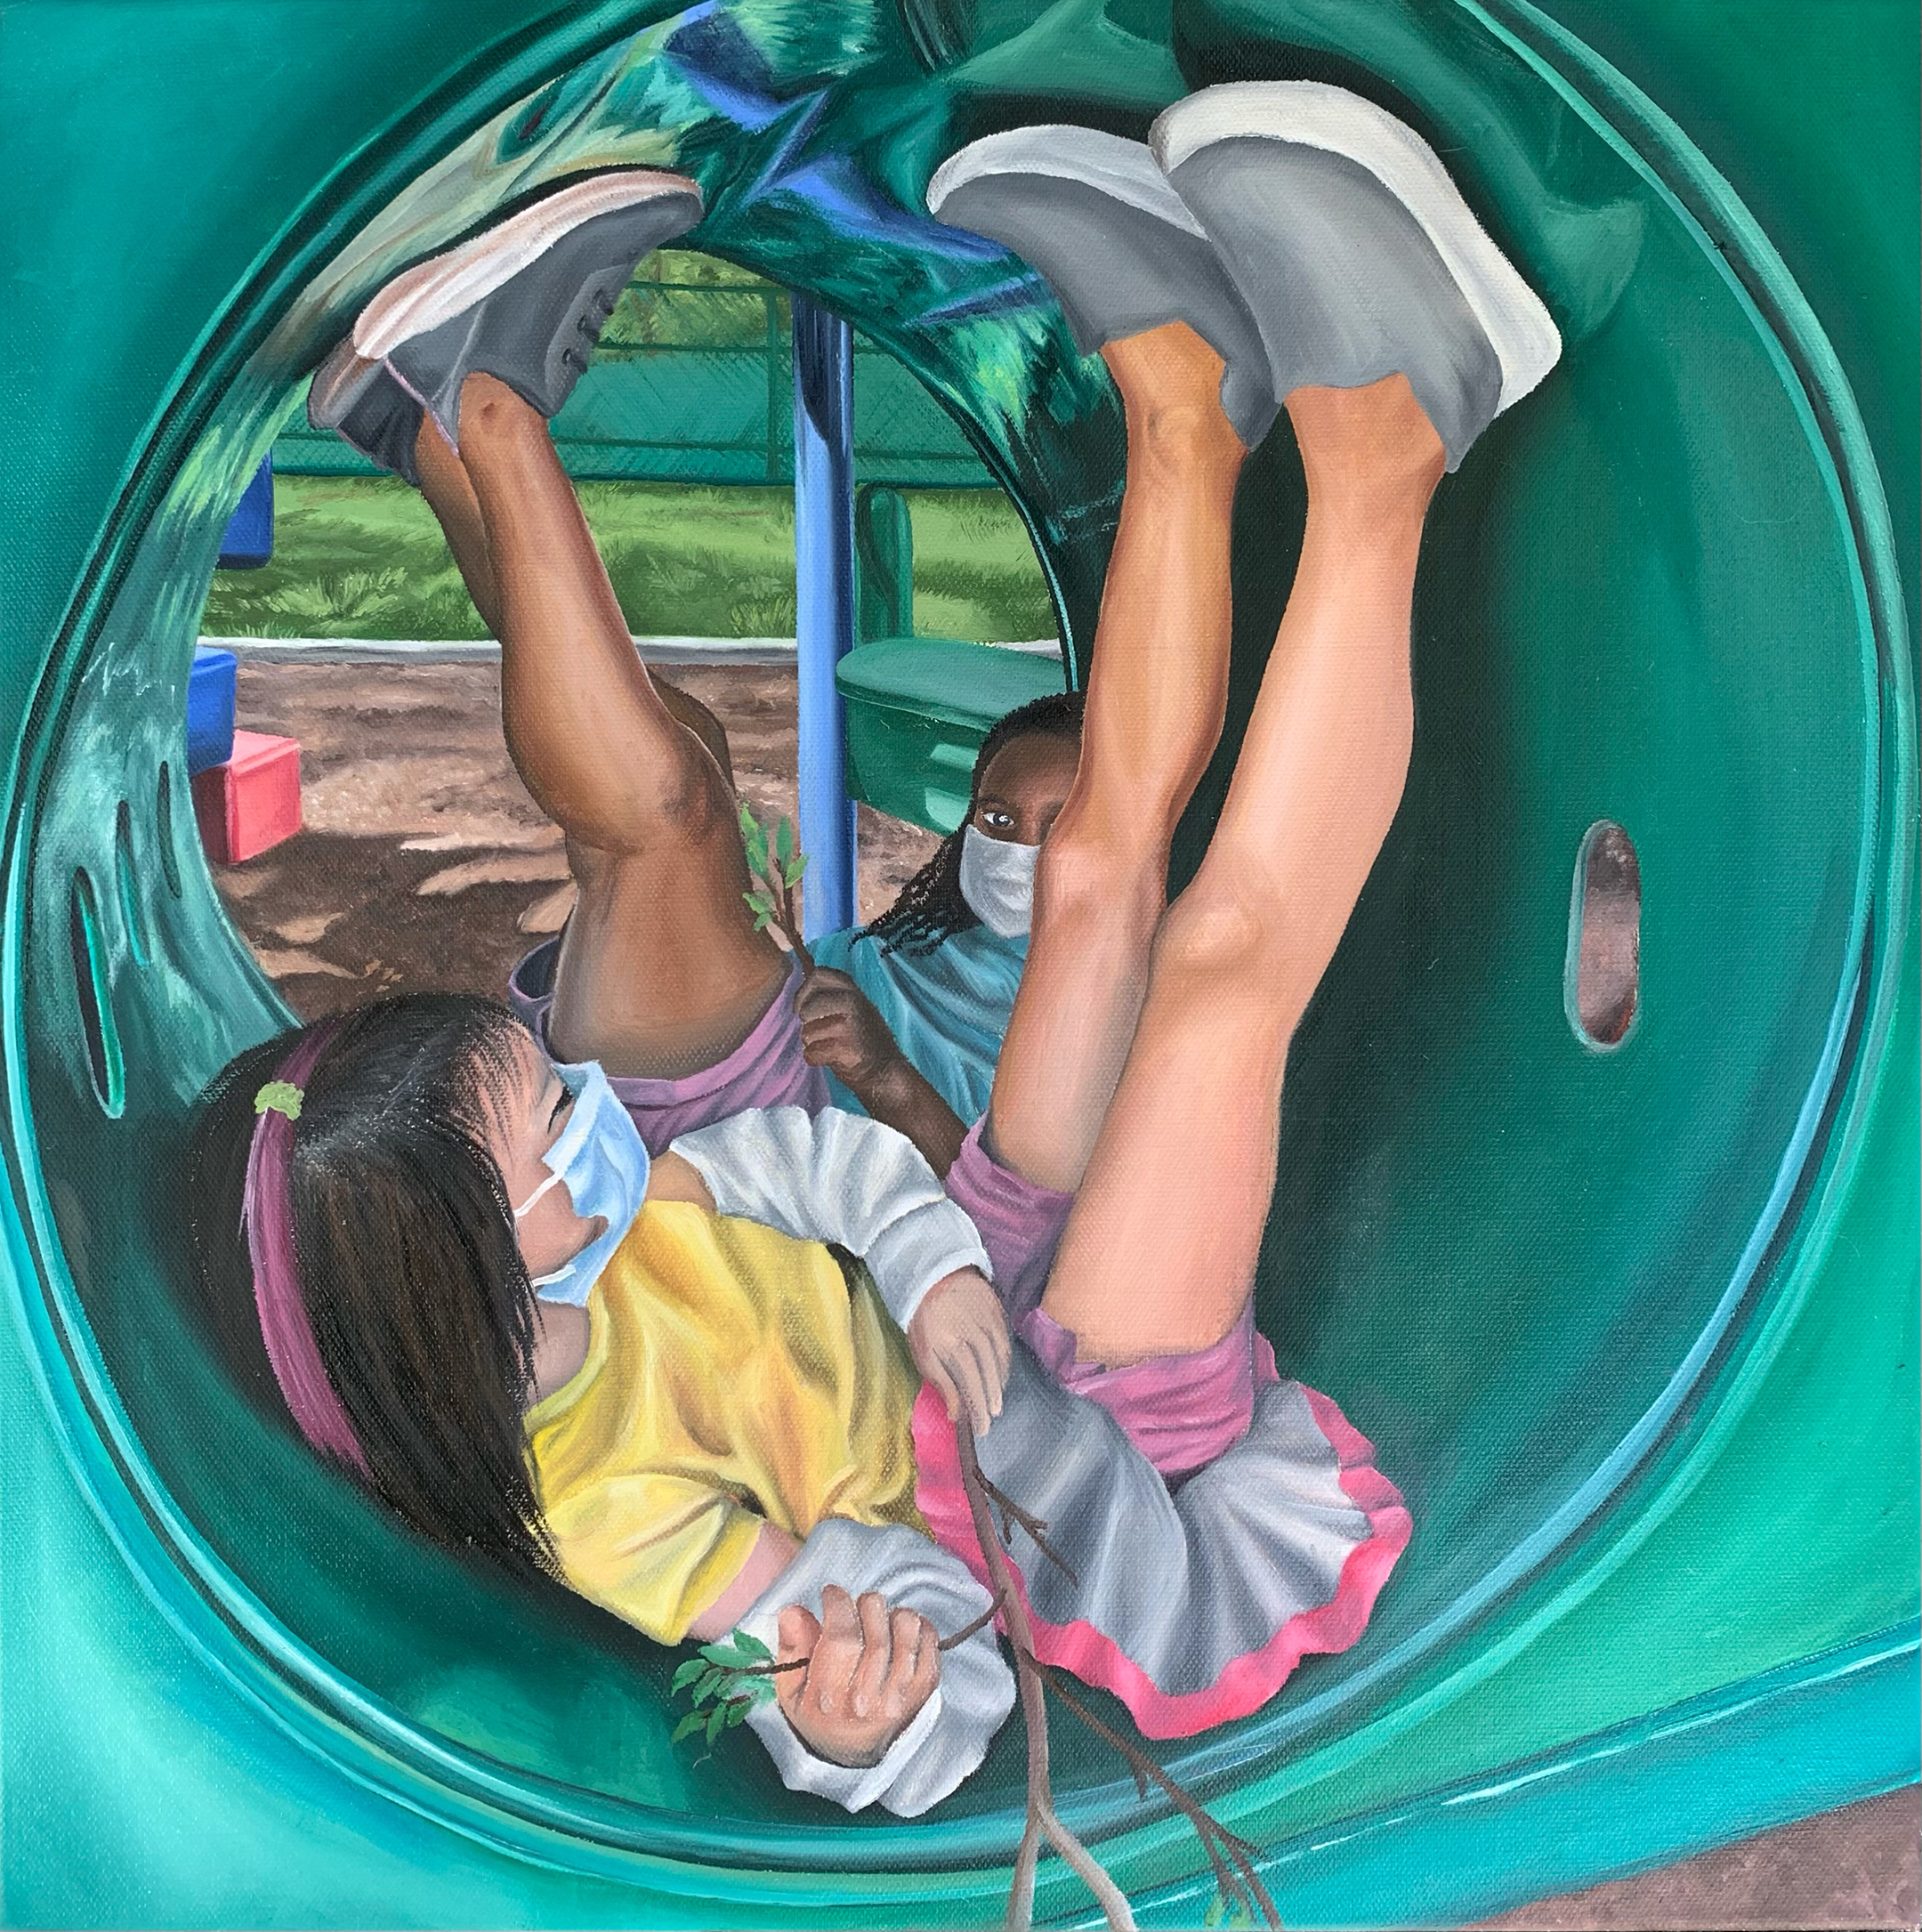 Painting of two young girls playing in a playground tube